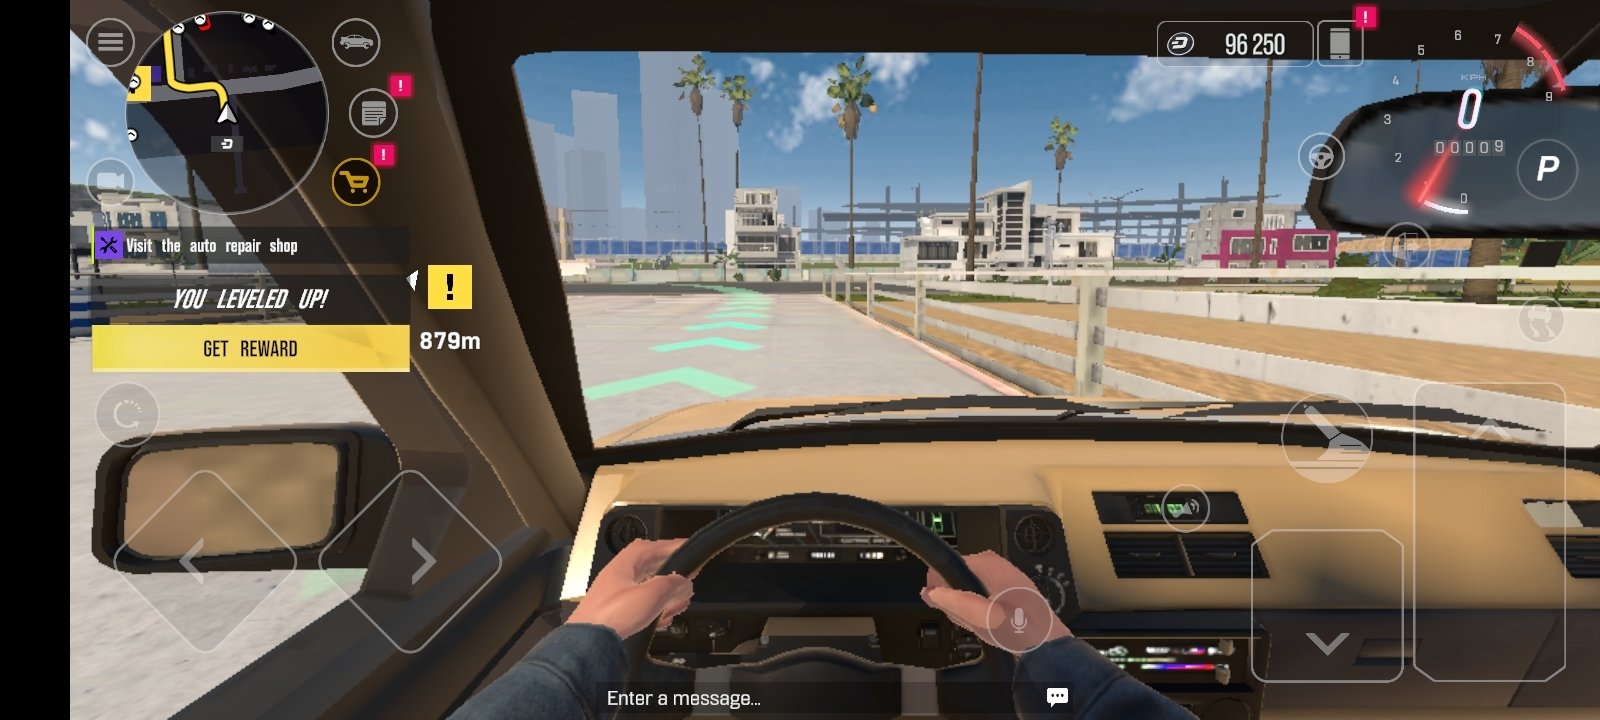 Drive Zone Online APK for Android Download